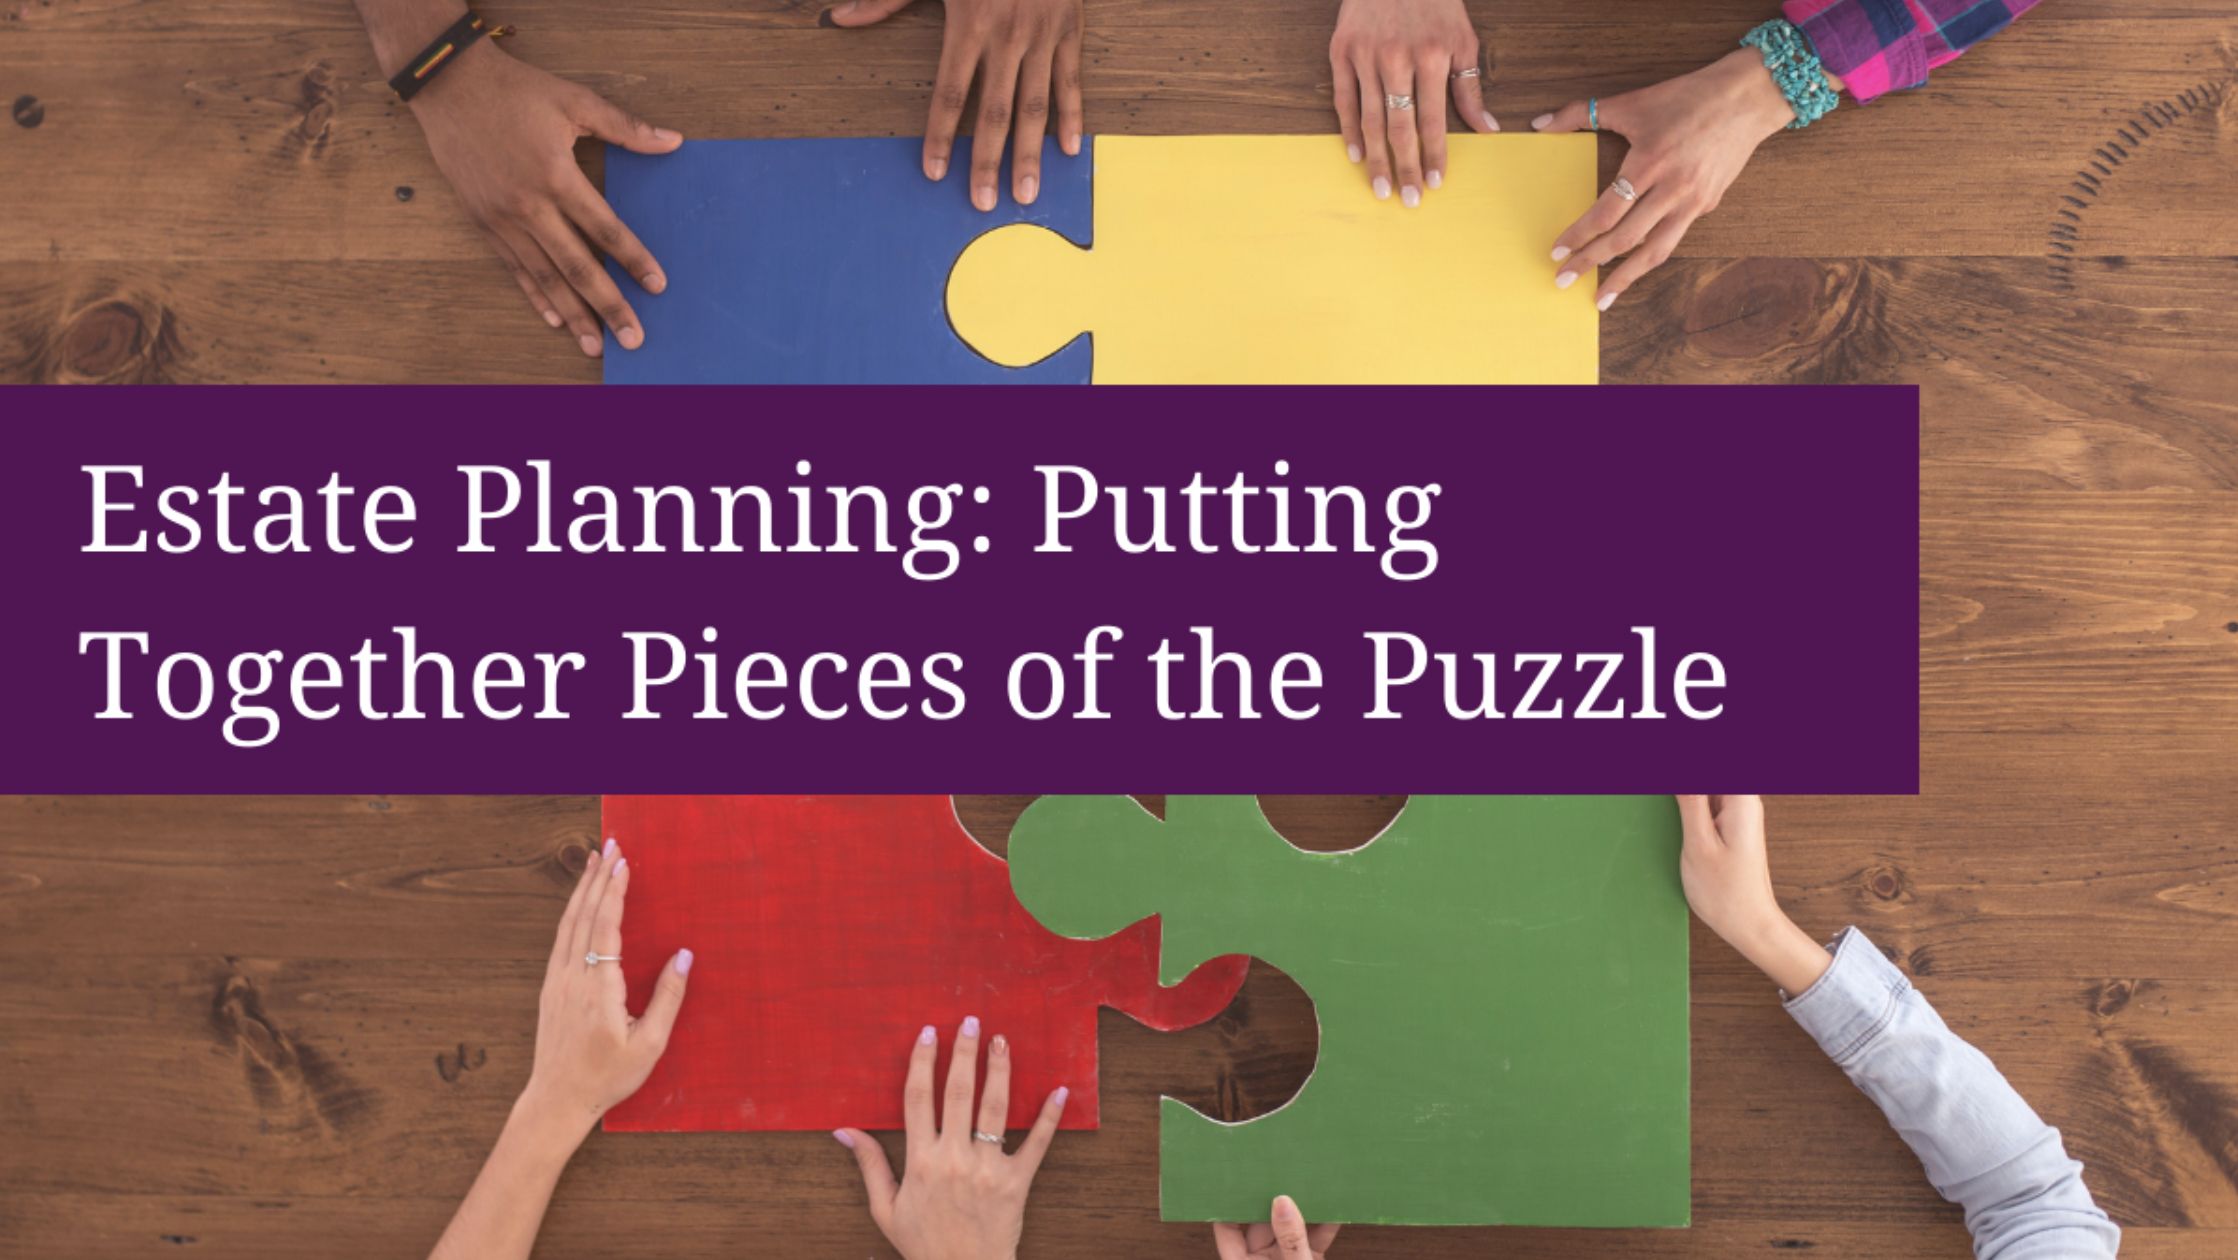 Estate Planning: Putting Together the Pieces of the Puzzle